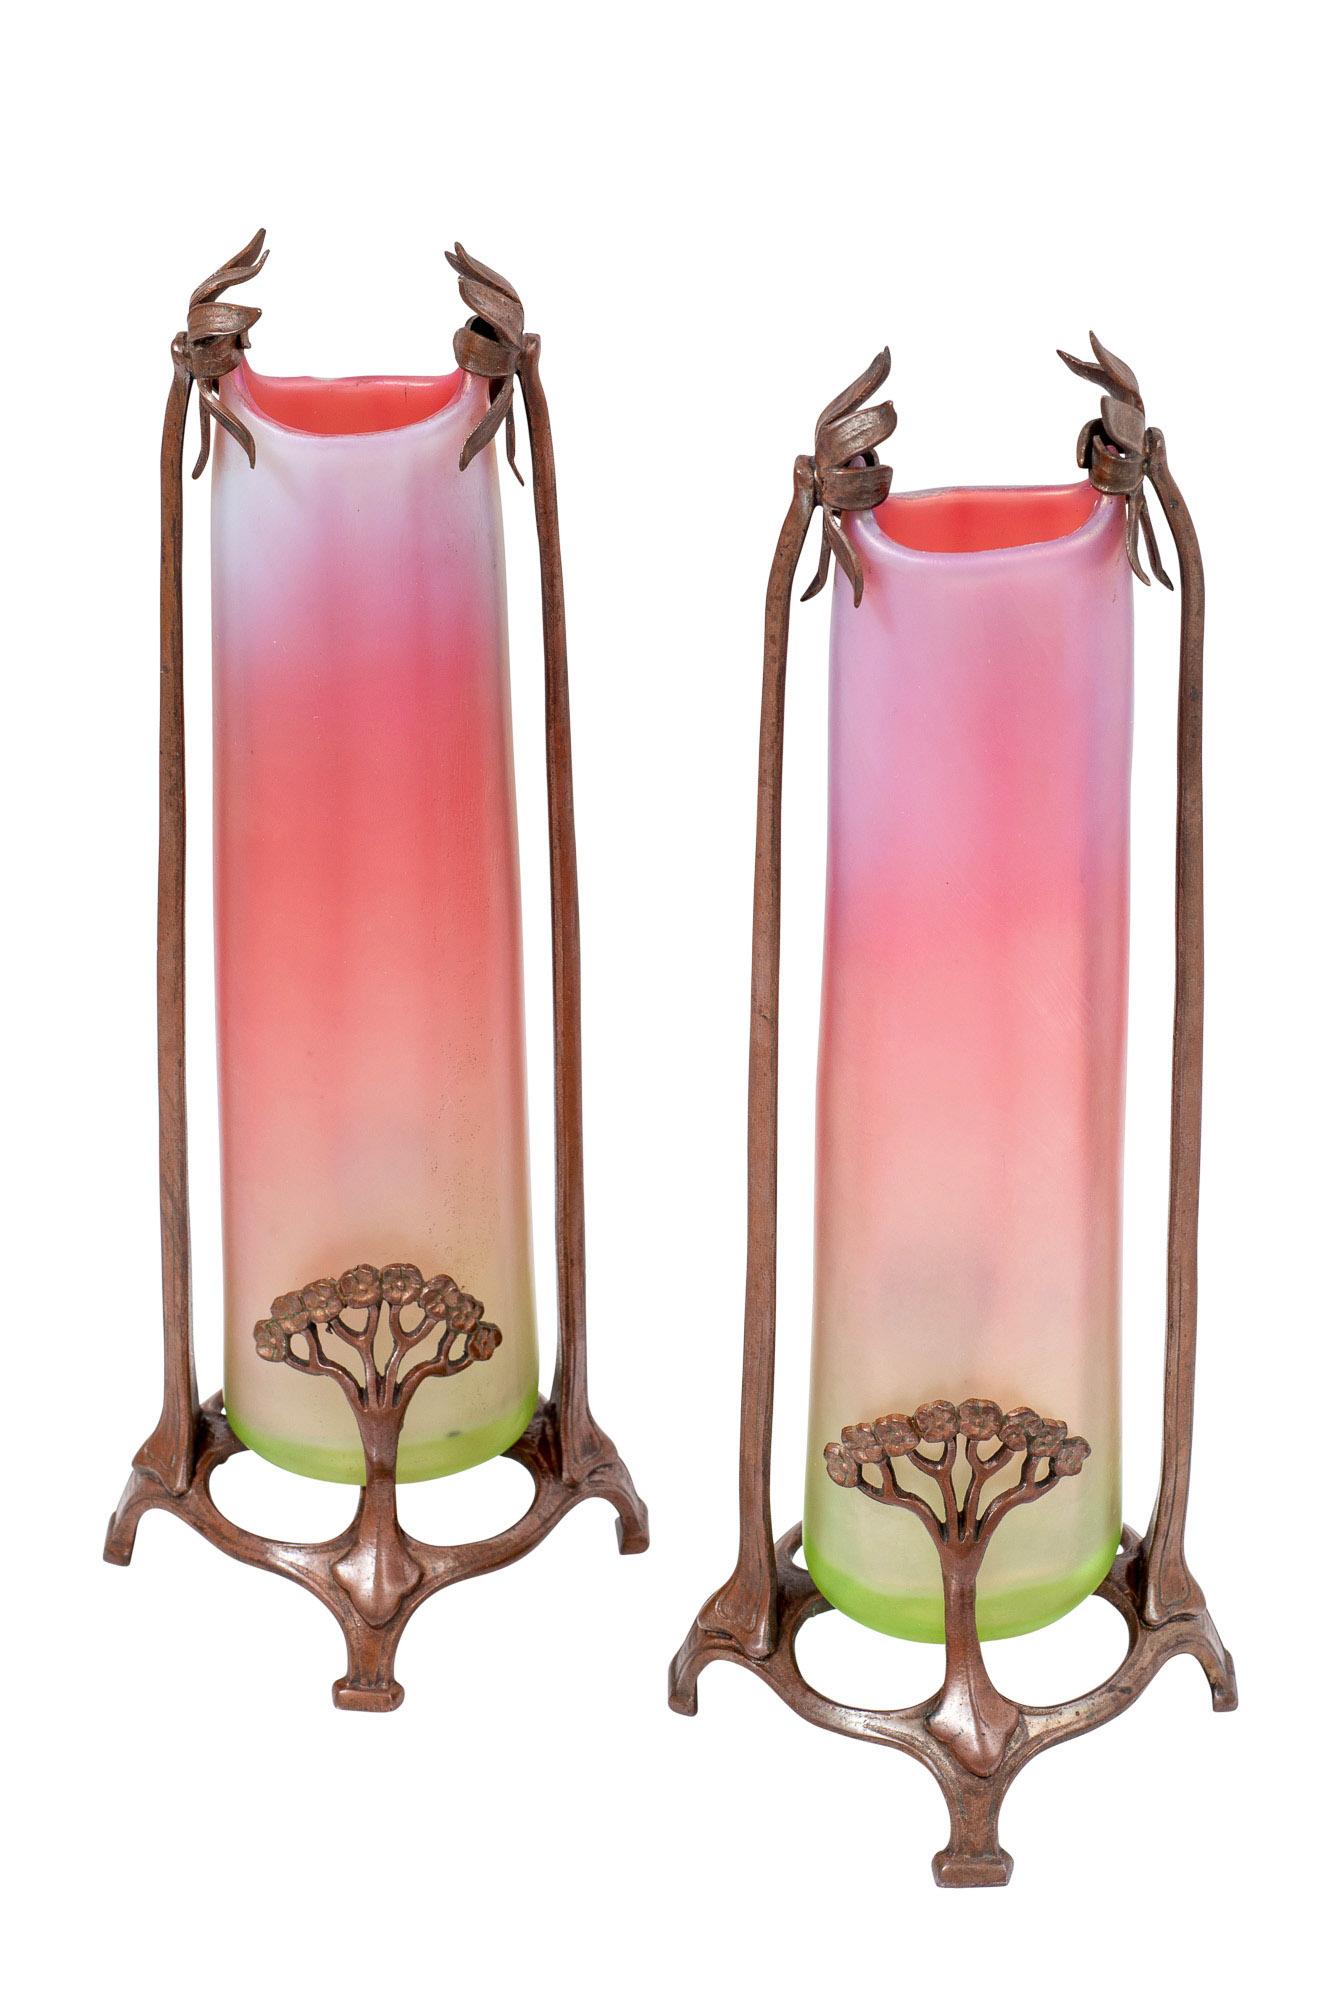 This delightful pair of vases was made by Loetz on behalf of the Viennese glass publisher E. Bakalowits Söhne and was decorated with an exquisite red bronze metal mount. Combinations of different materials were very popular during the Viennese